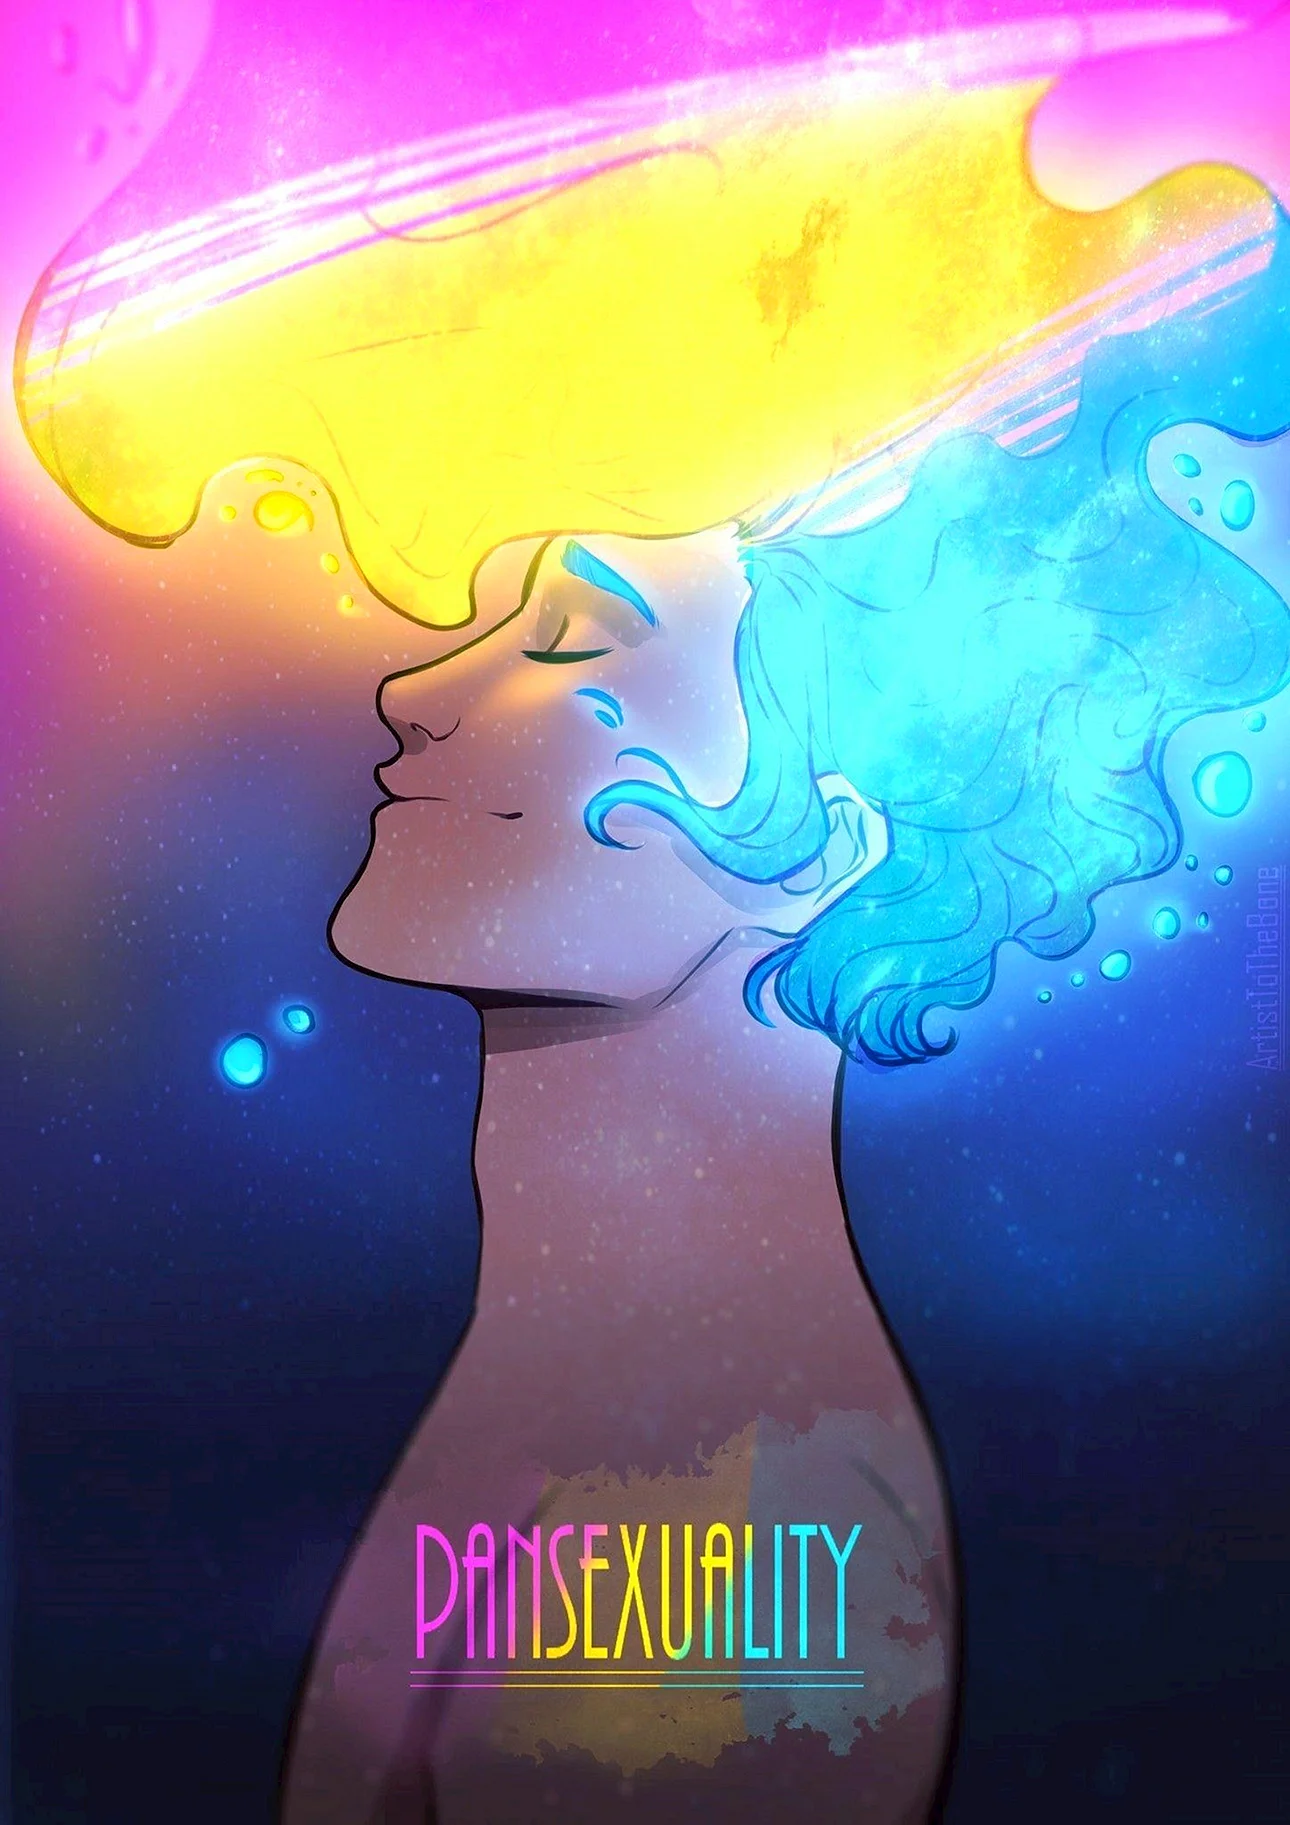 Pansexual Art Wallpaper For iPhone